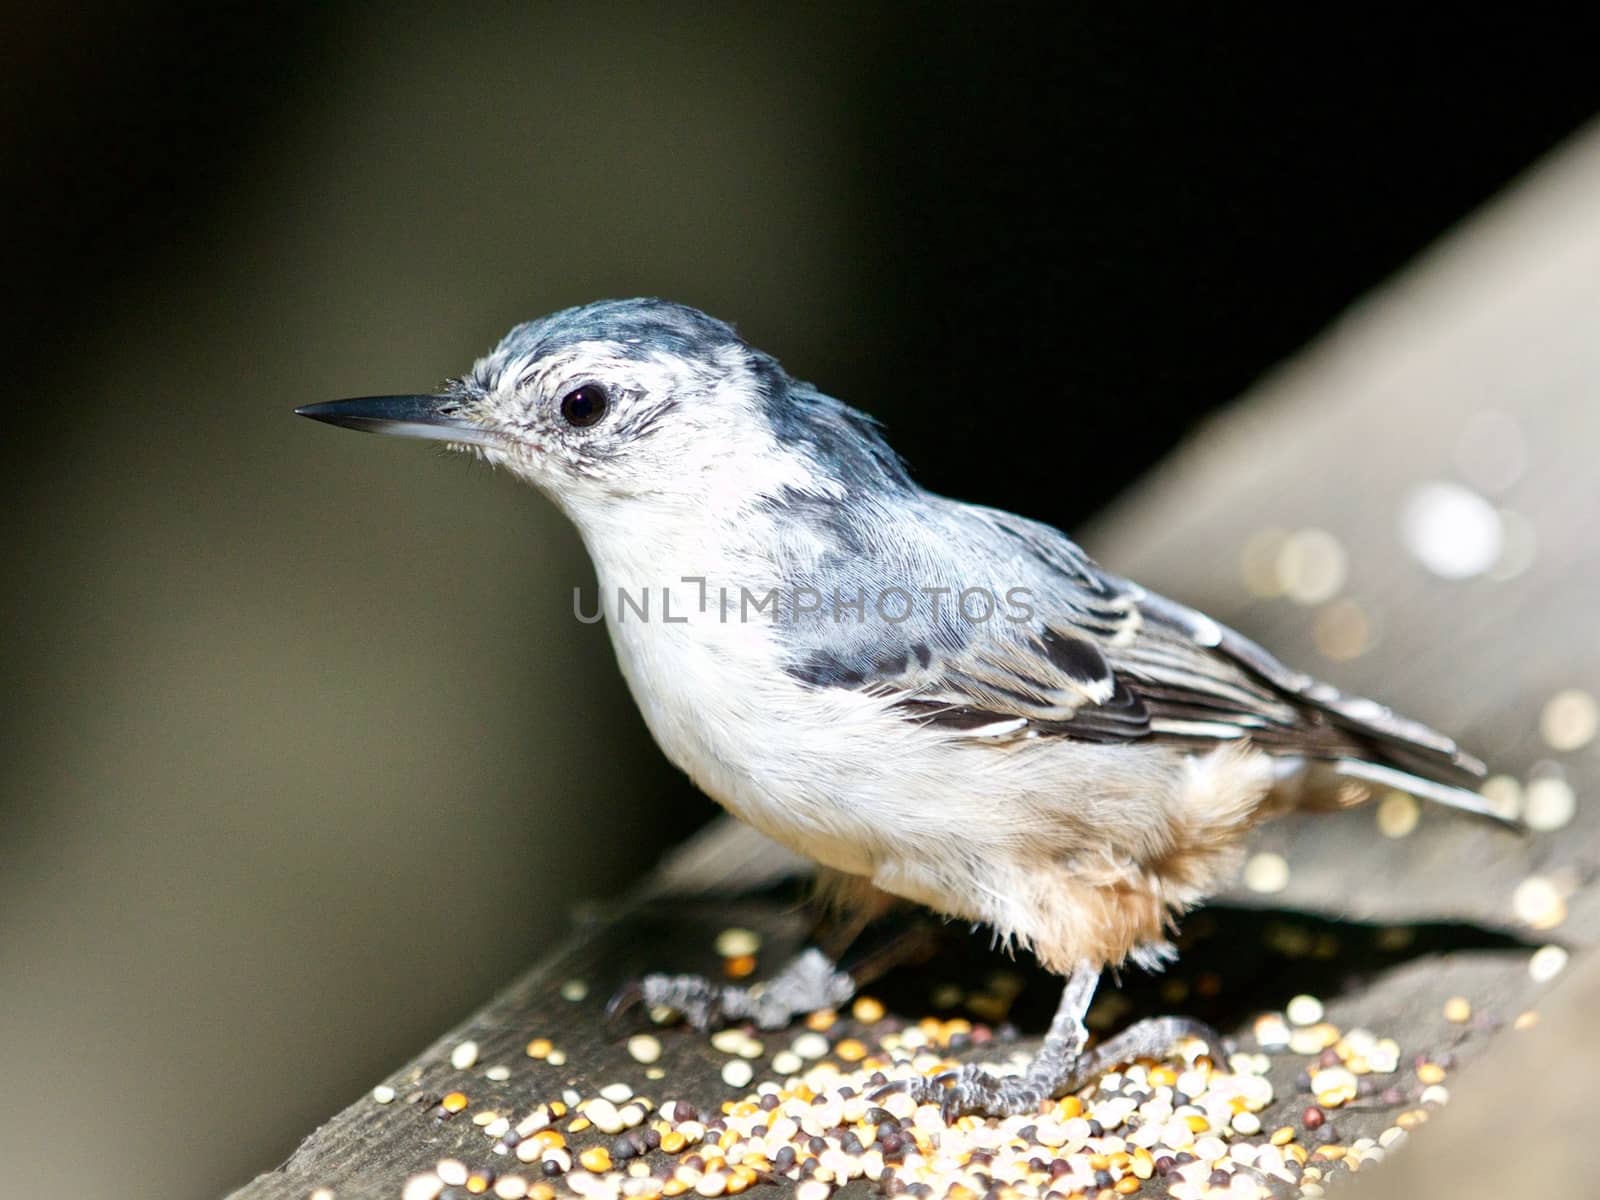 Beautiful isolated image with a white-breasted nuthatch bird